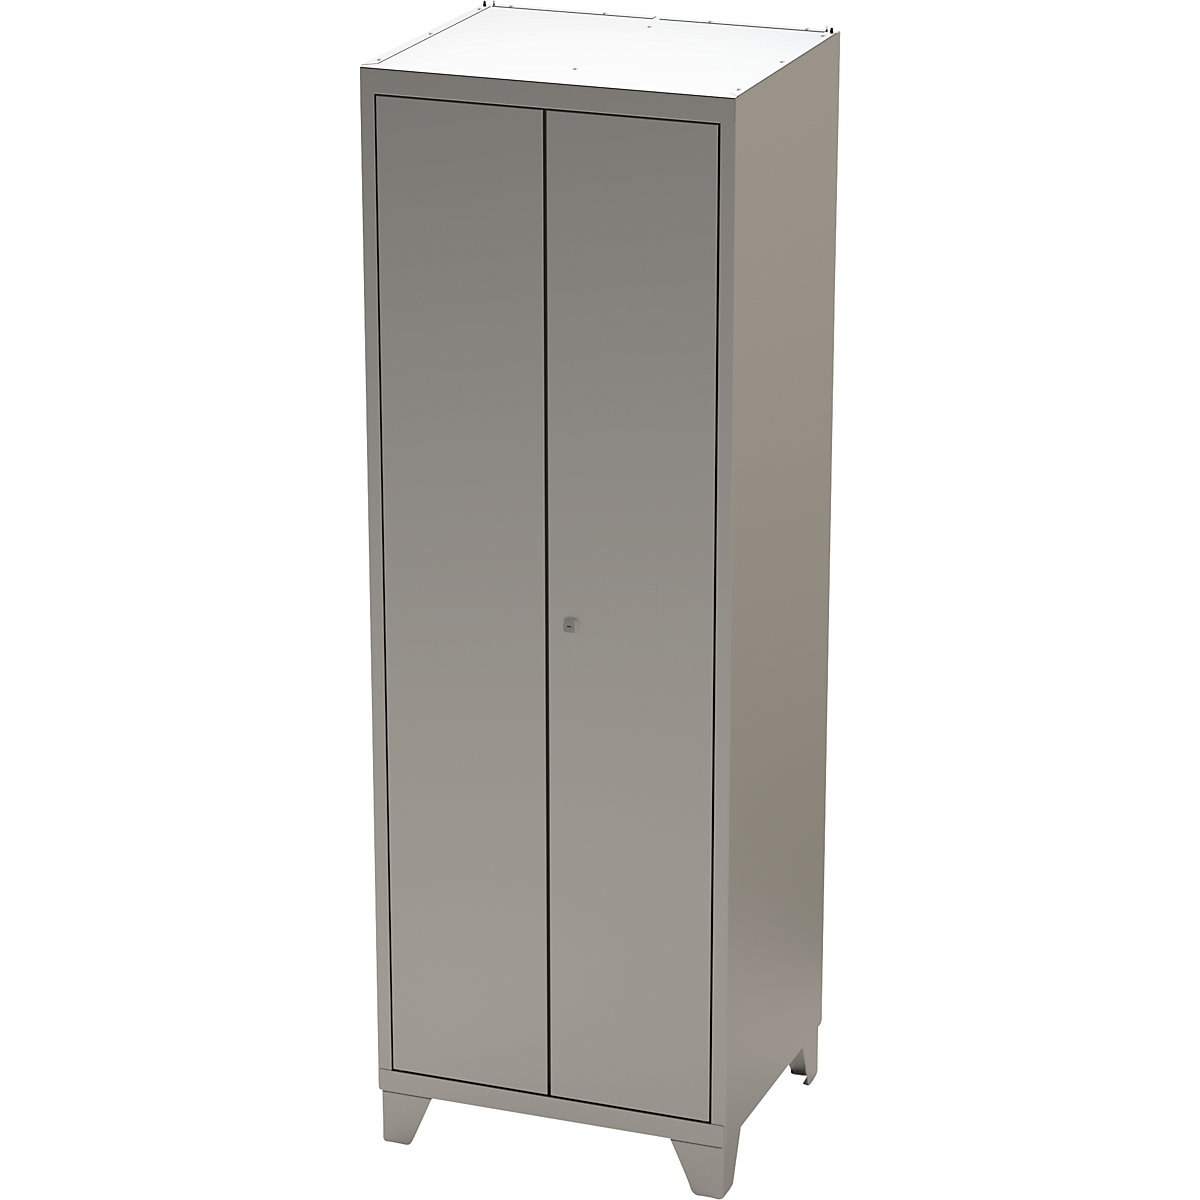 Stainless steel cabinet with stud feet